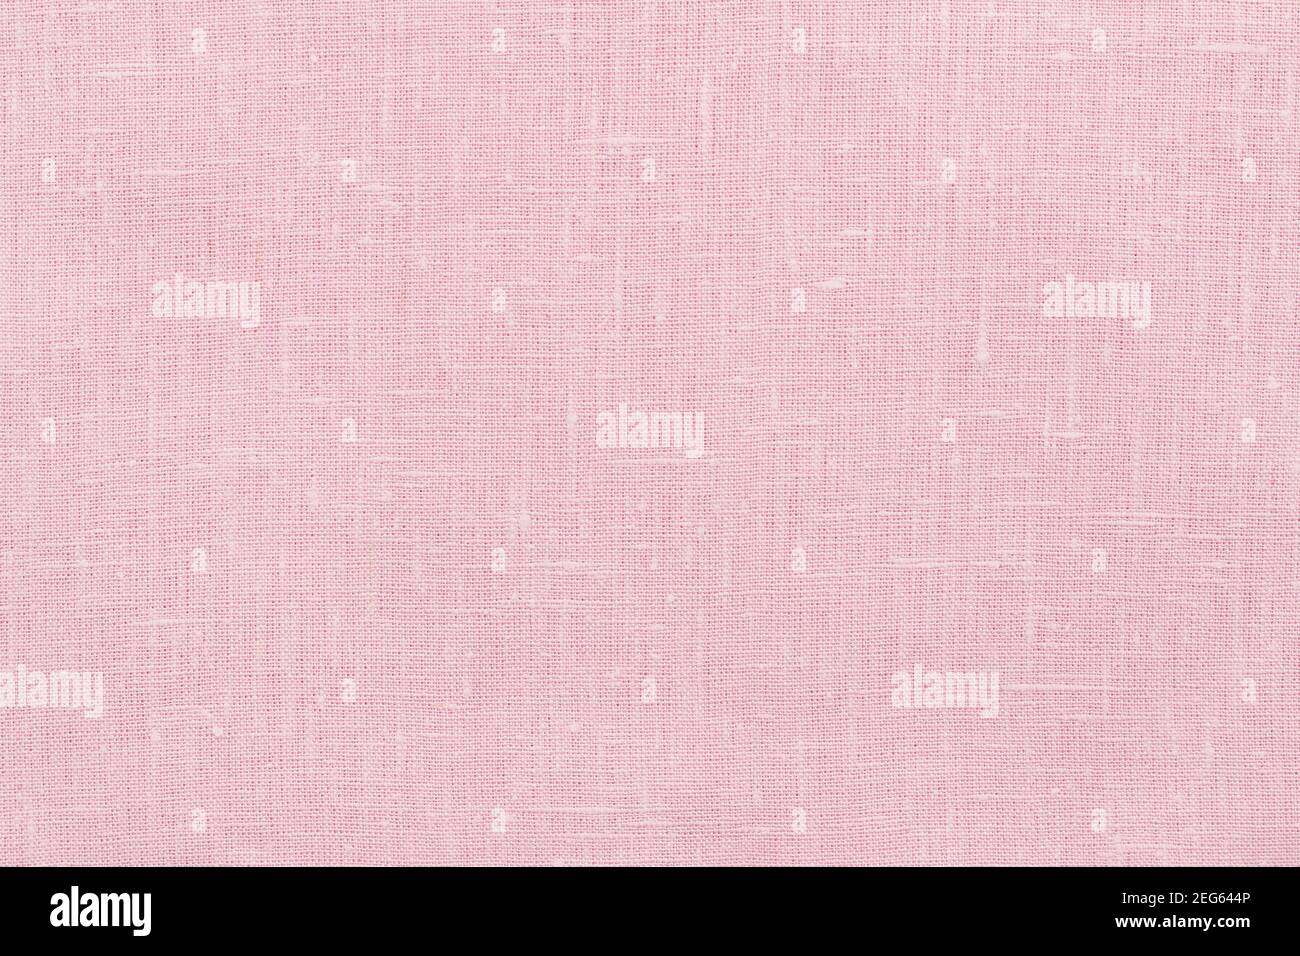 Close Up Surface Background Of Pink Jeans Fabric Texture. Stock